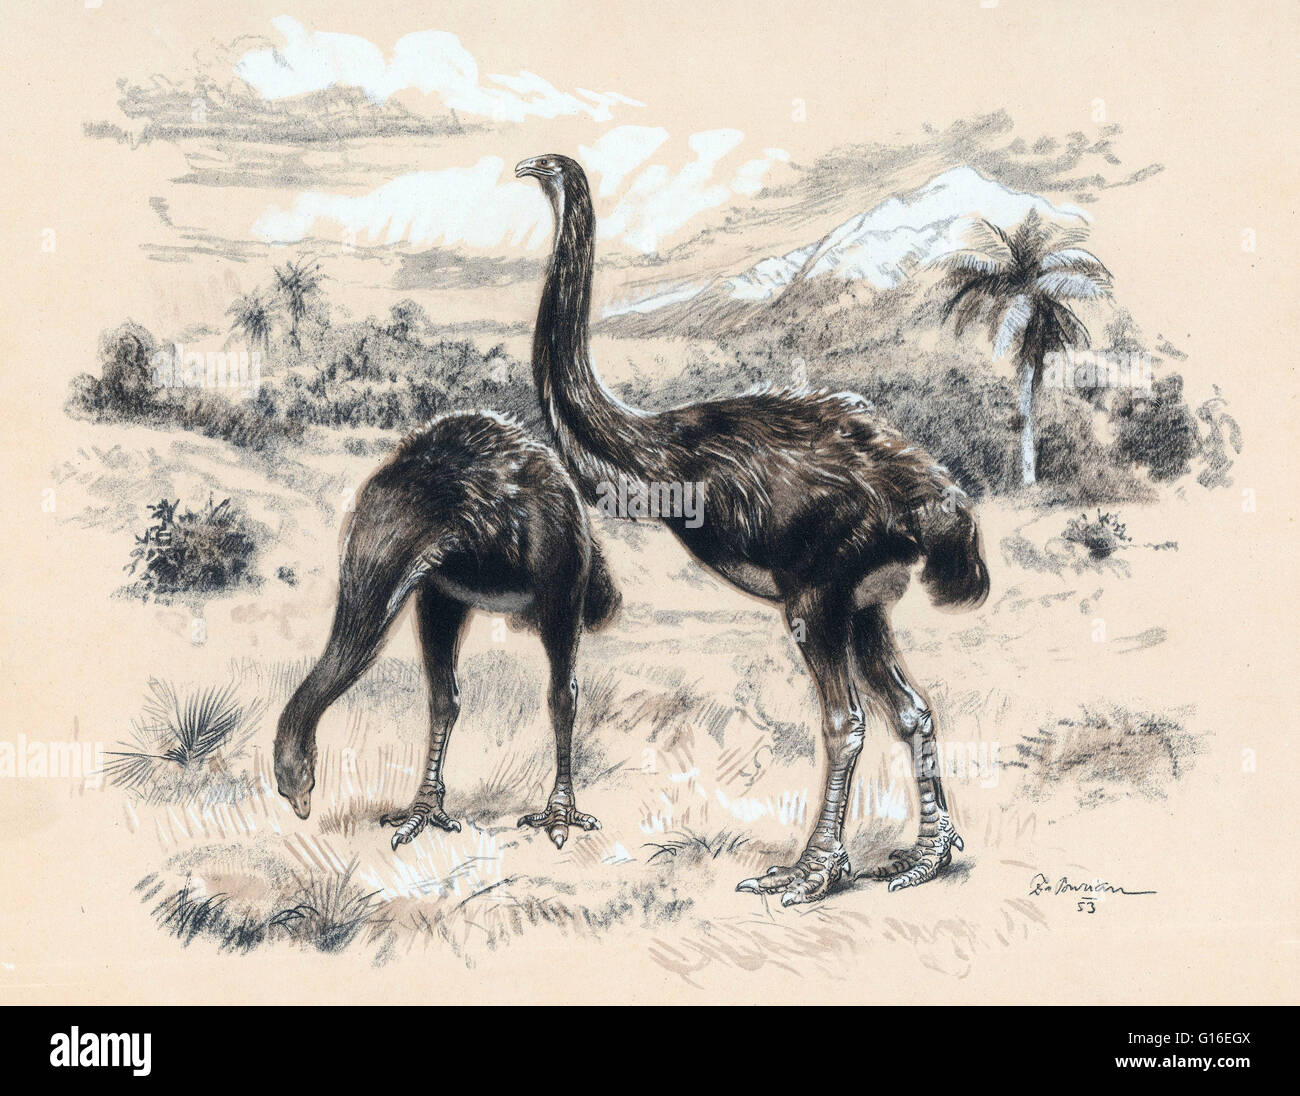 The giant moa (Dinornis) is an extinct genus of ratite birds belonging to the moa family. Like all ratites it was a member of the order Struthioniformes. The Struthioniformes are flightless birds with a sternum without a keel. They also have a distinctive Stock Photo